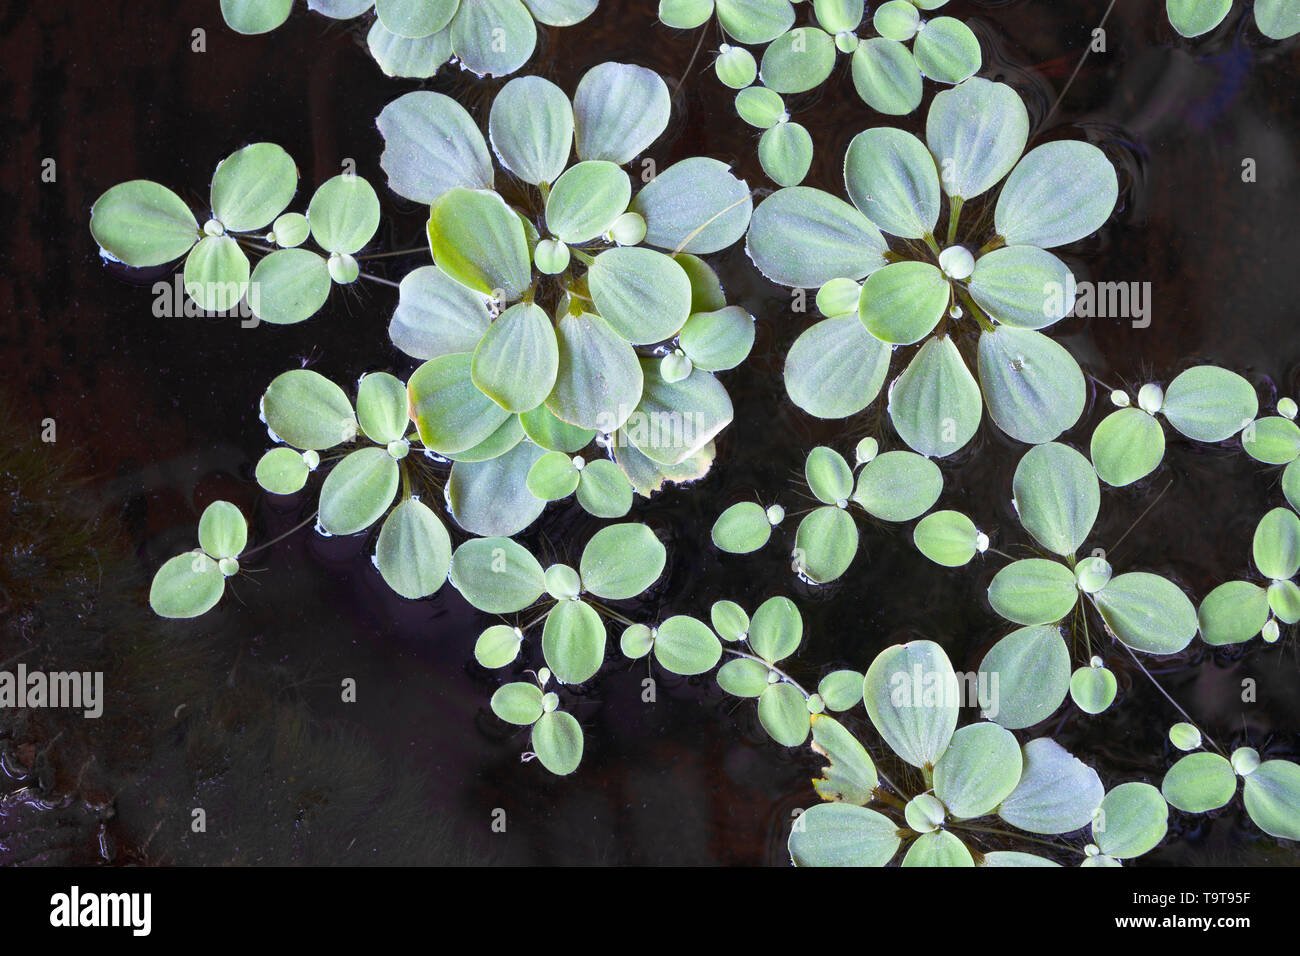 Water cabbage or water lettuce, Pistia stratiotes Stock Photo